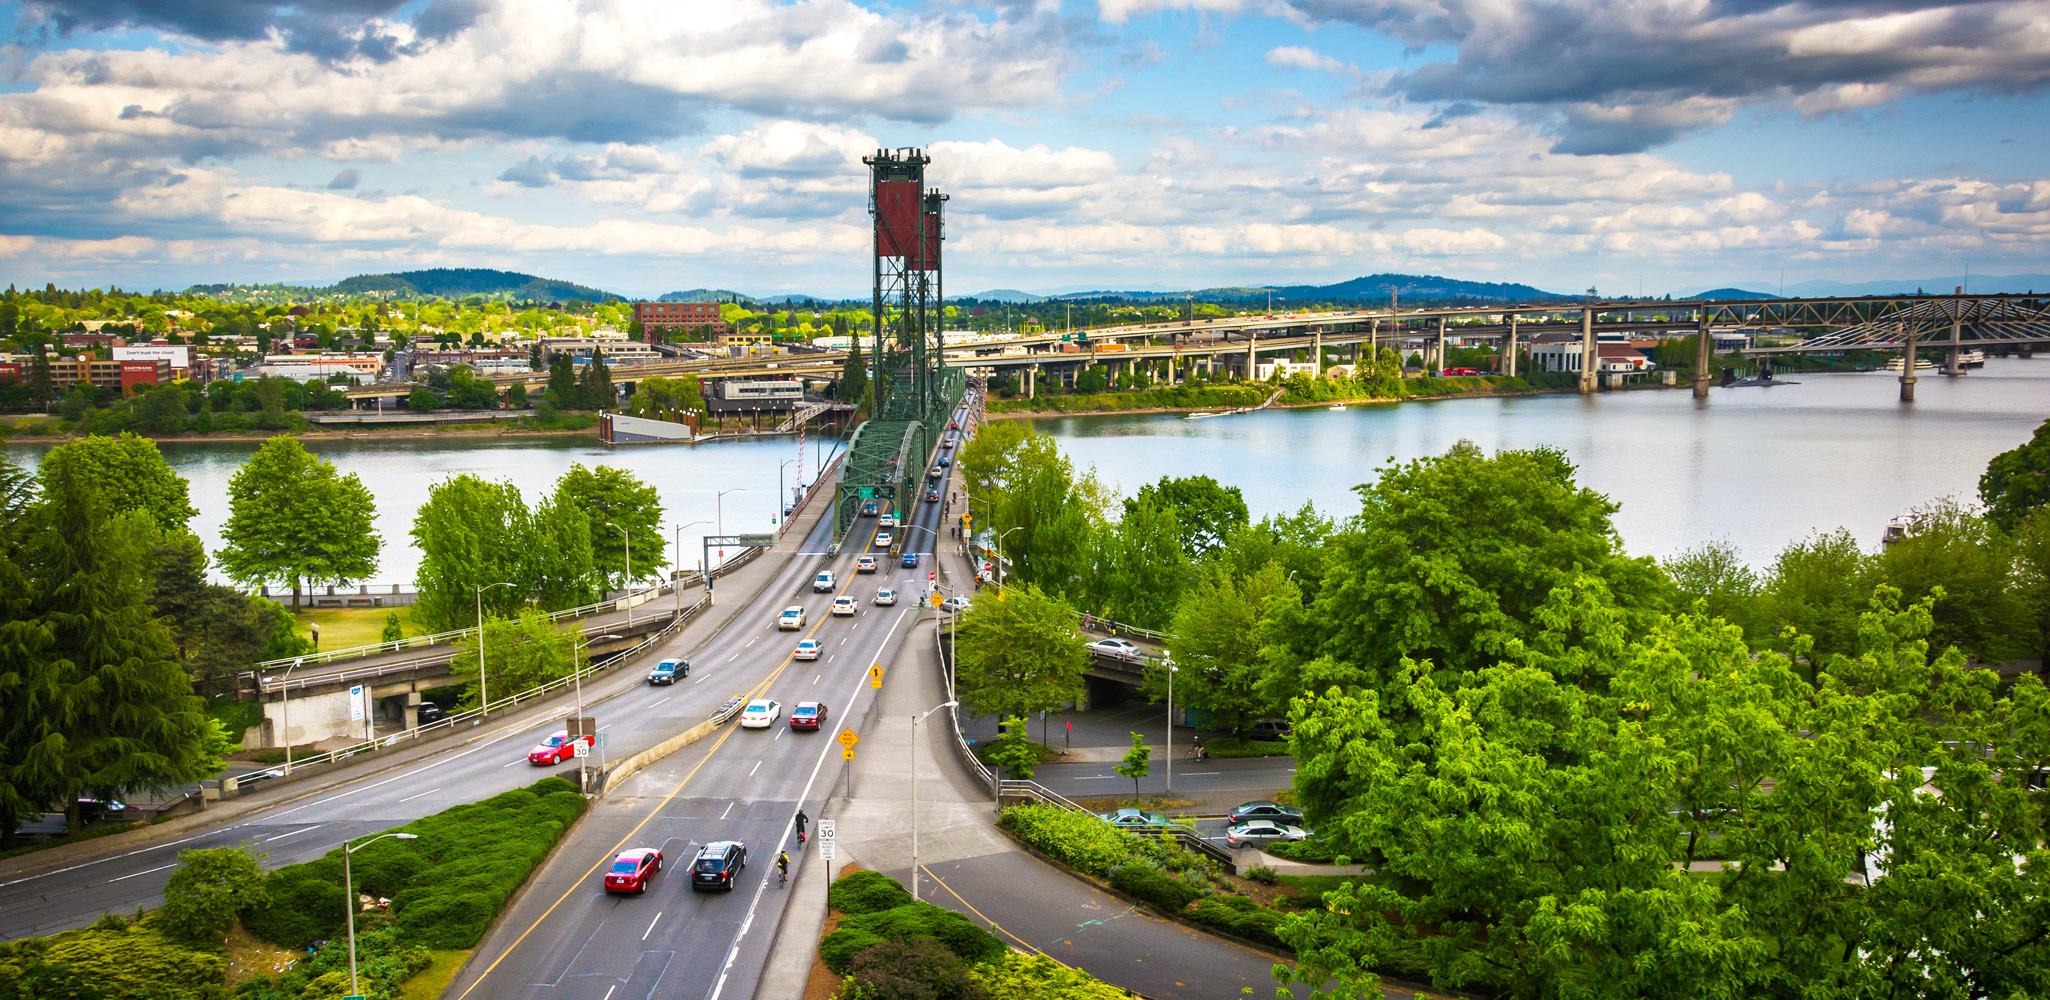 How to spend a long weekend in Portland, Oregon - Born Free - Fare Buzz